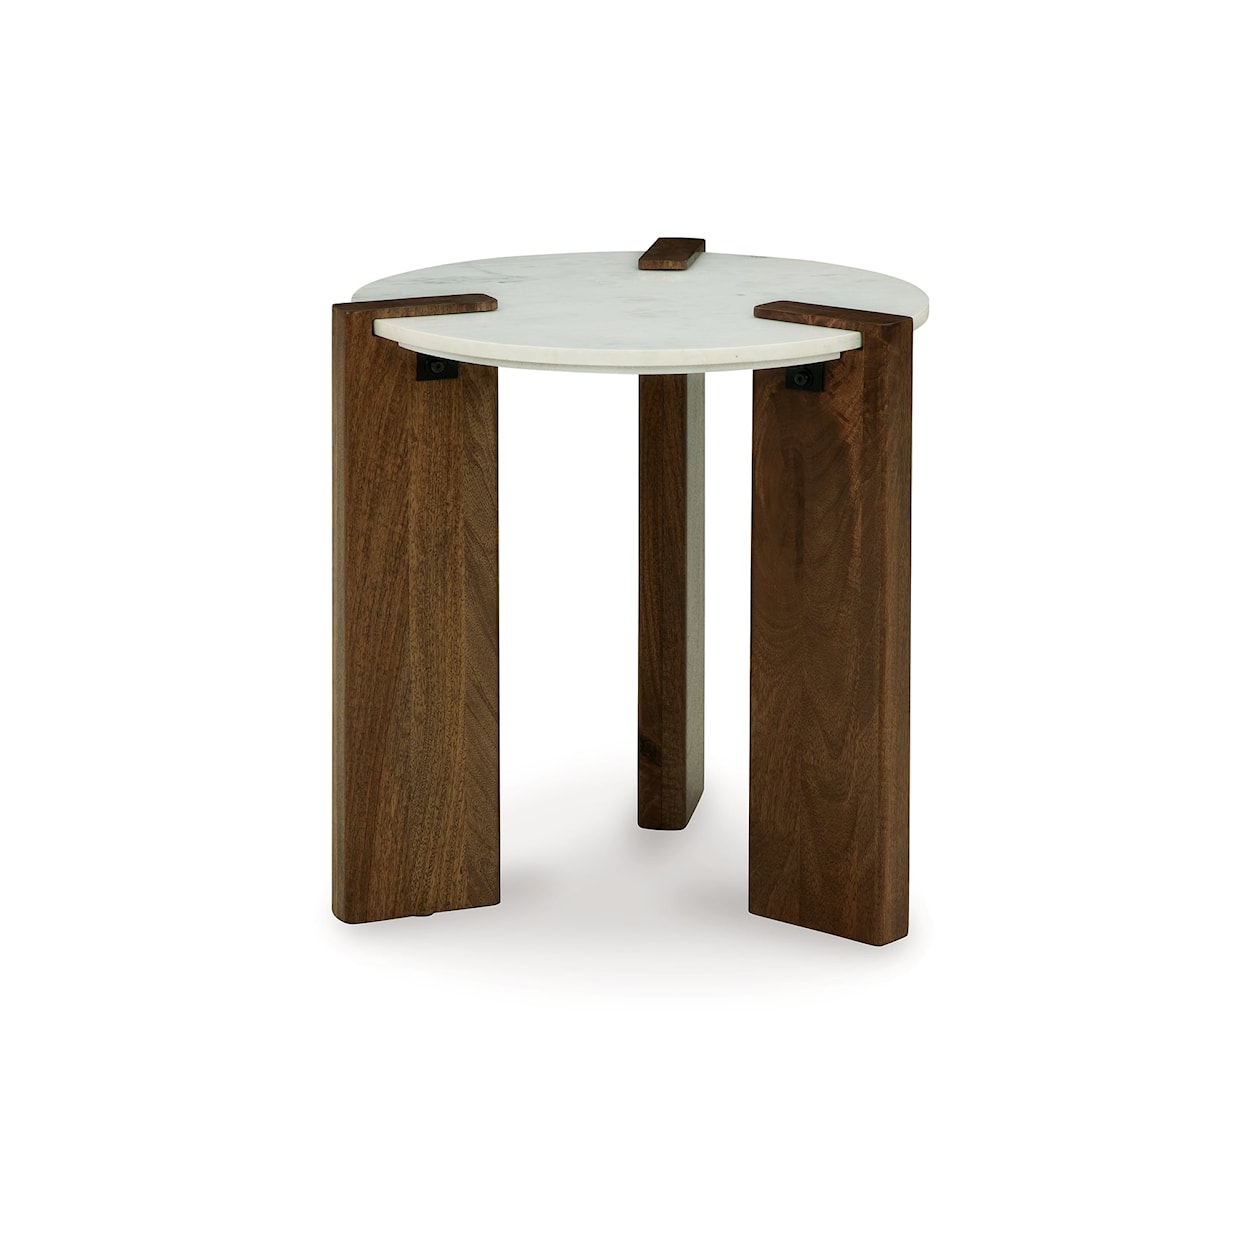 Benchcraft Isanti Round End Table